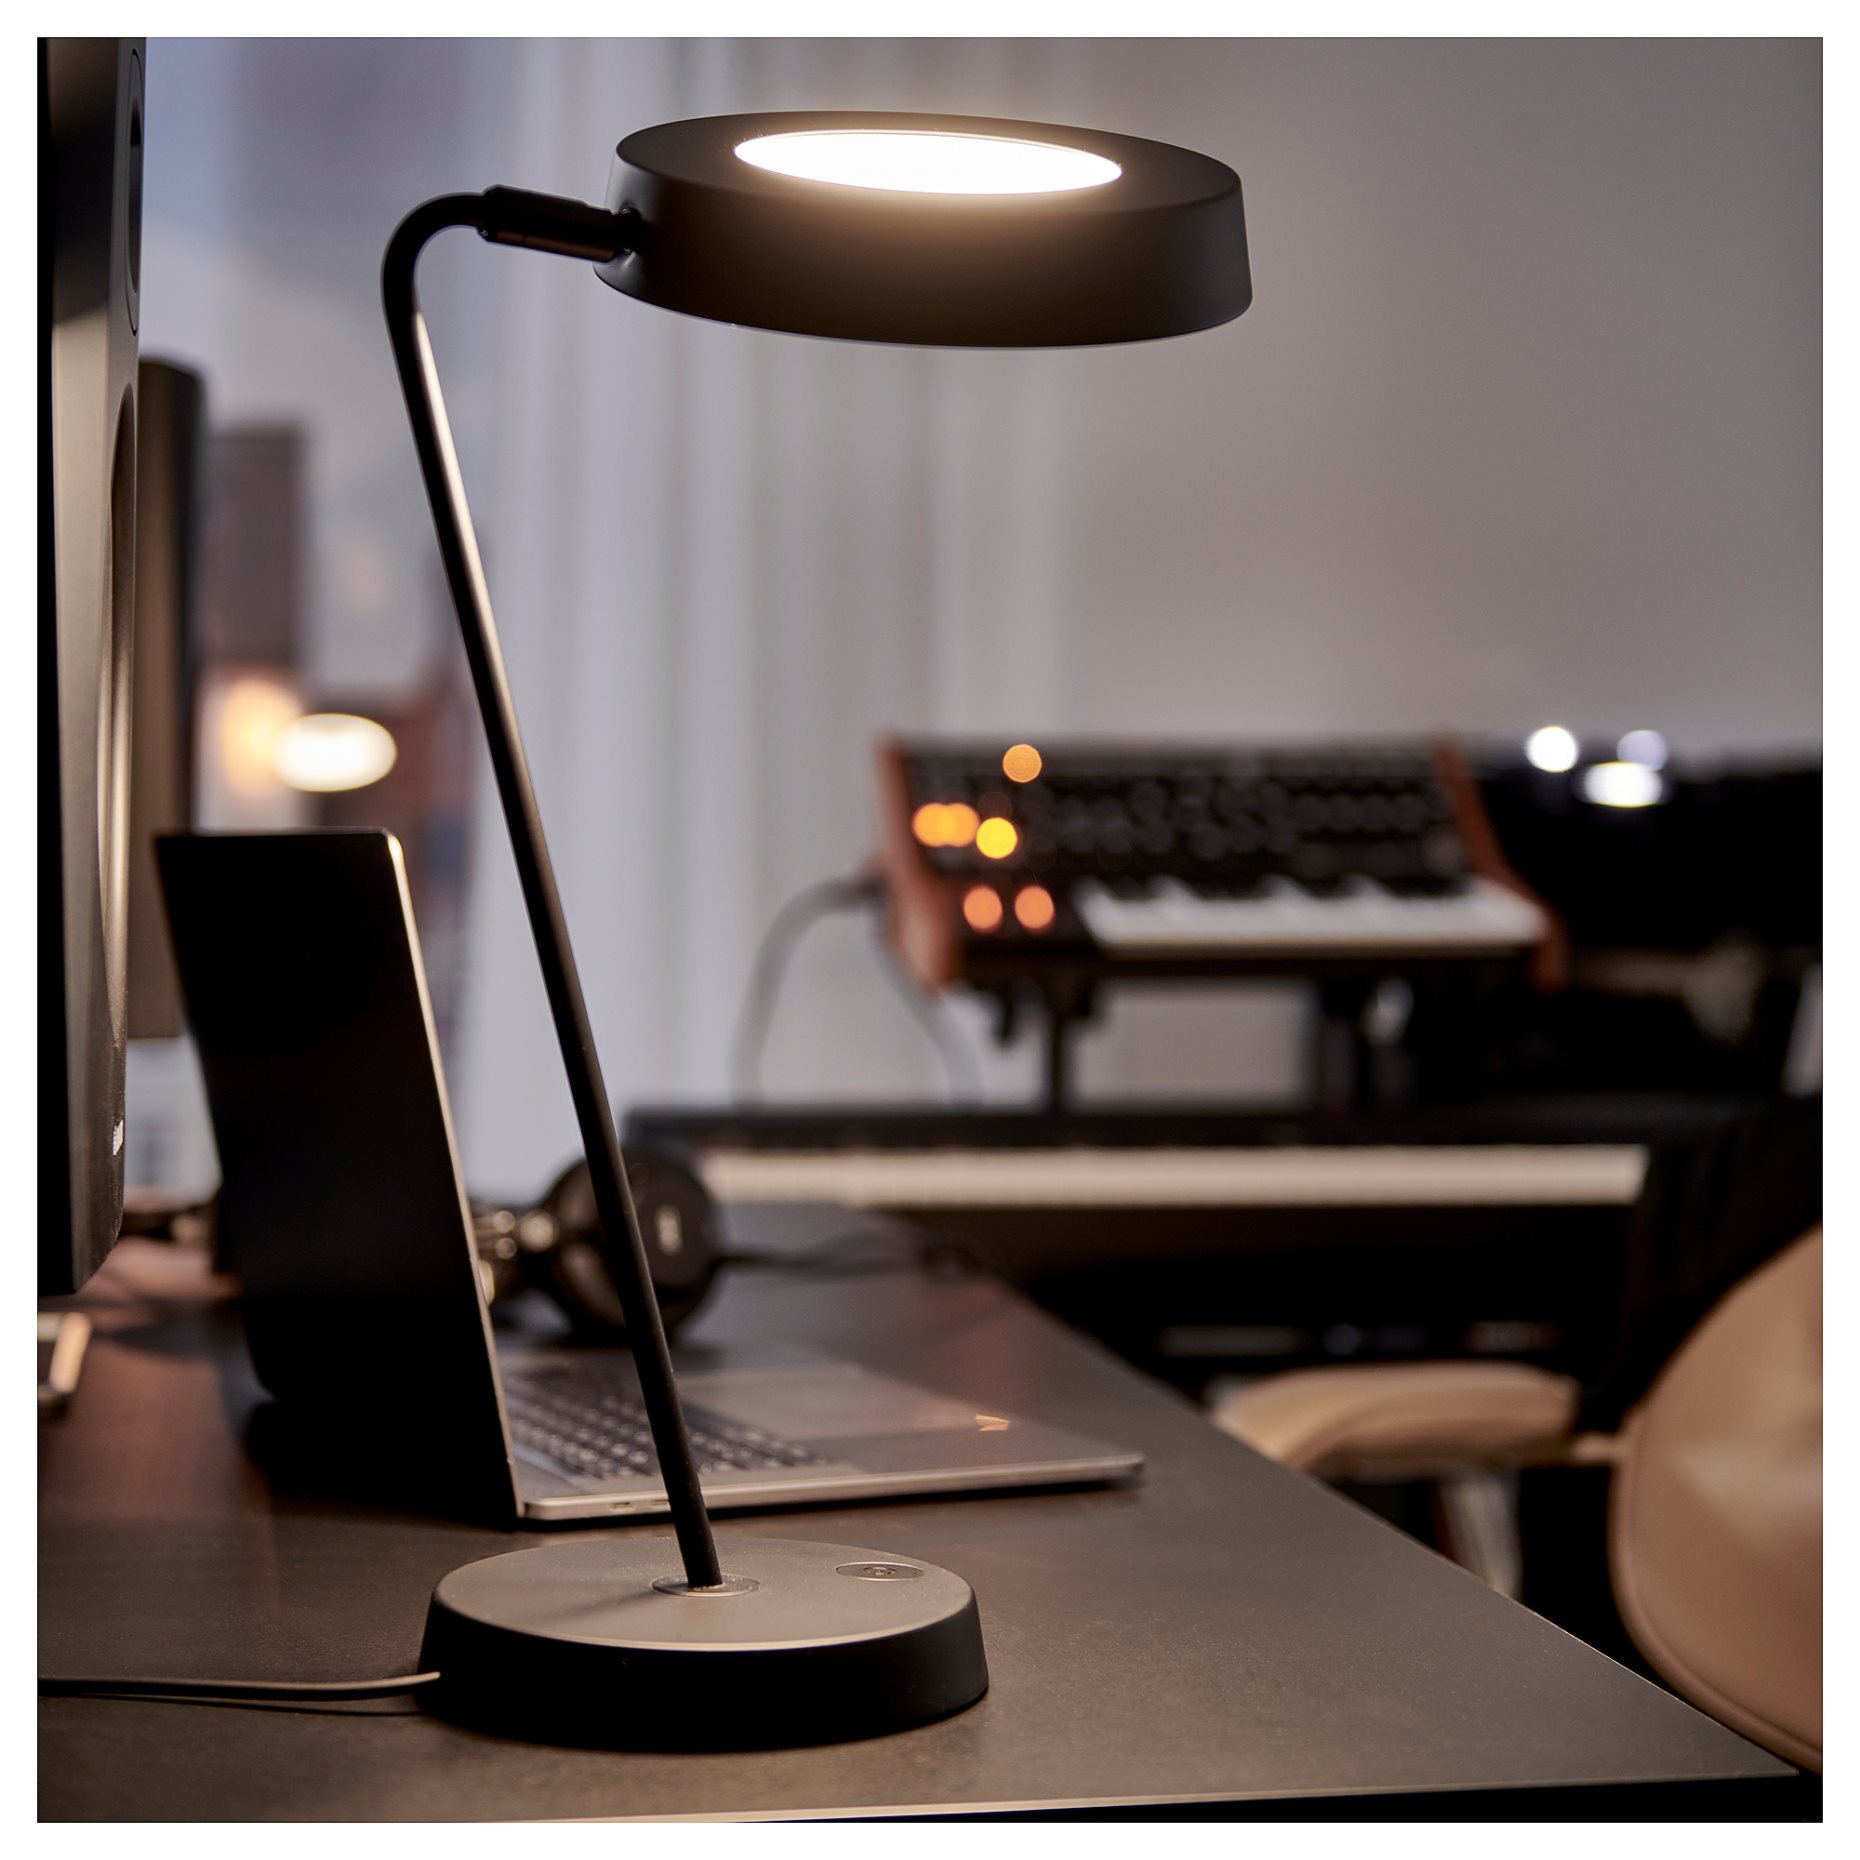 OBEGRANSAD, work lamp with built-in LED light source/dimmable, 605.262.69